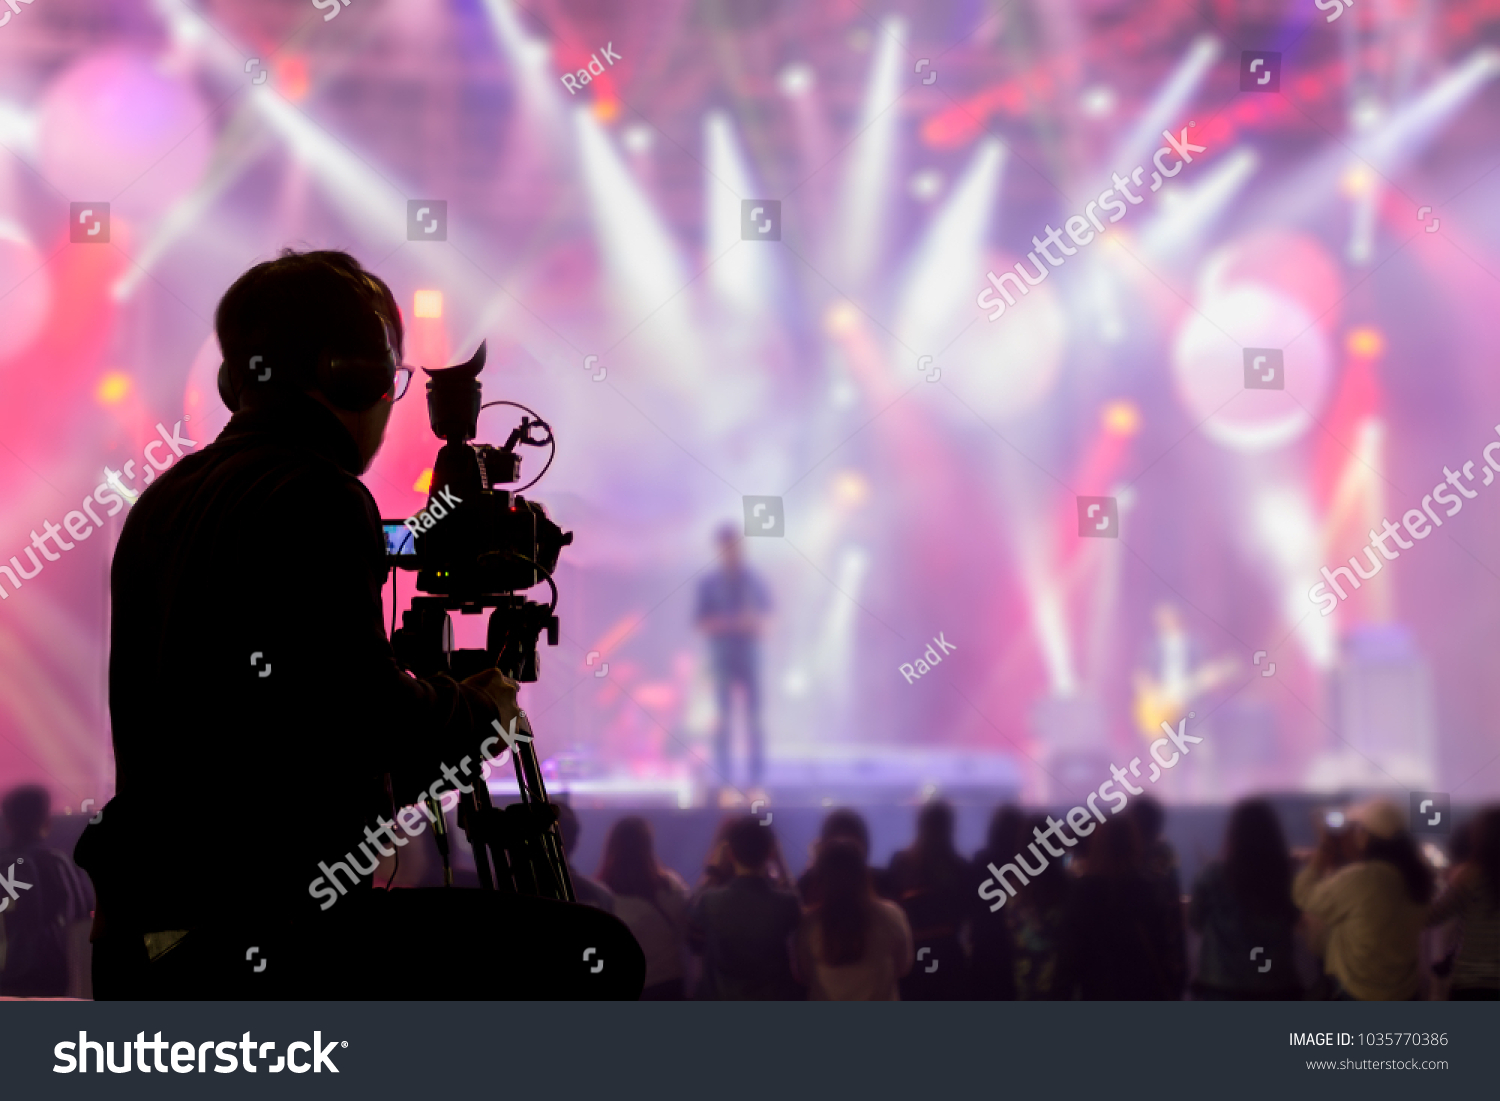 The filmmaker is recording and broadcasting live concerts on camcorders. Professional Video Recording Business #1035770386